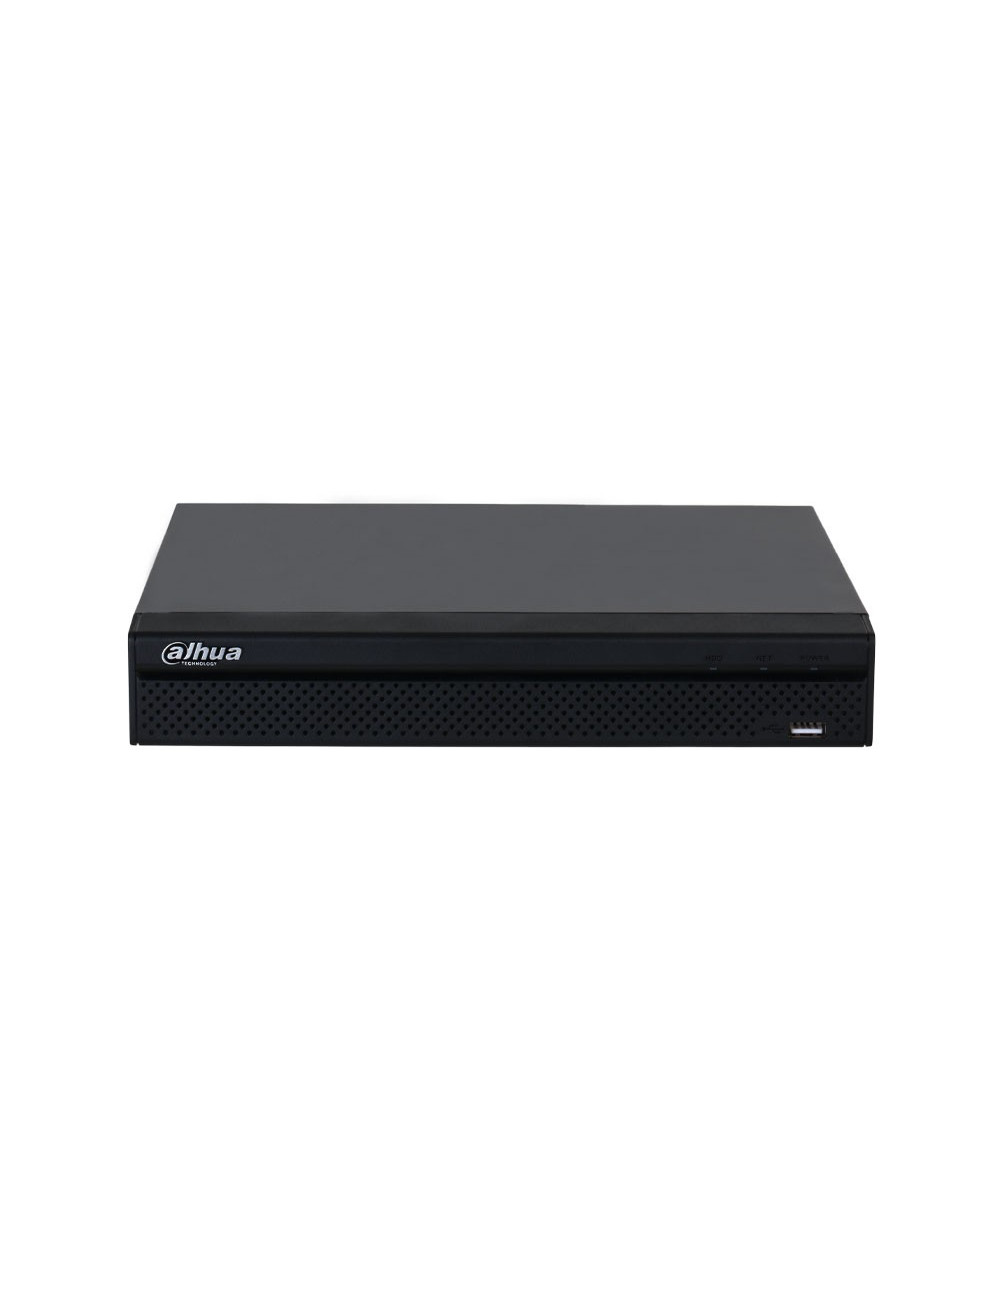 DHI-NVR2108HS-S3